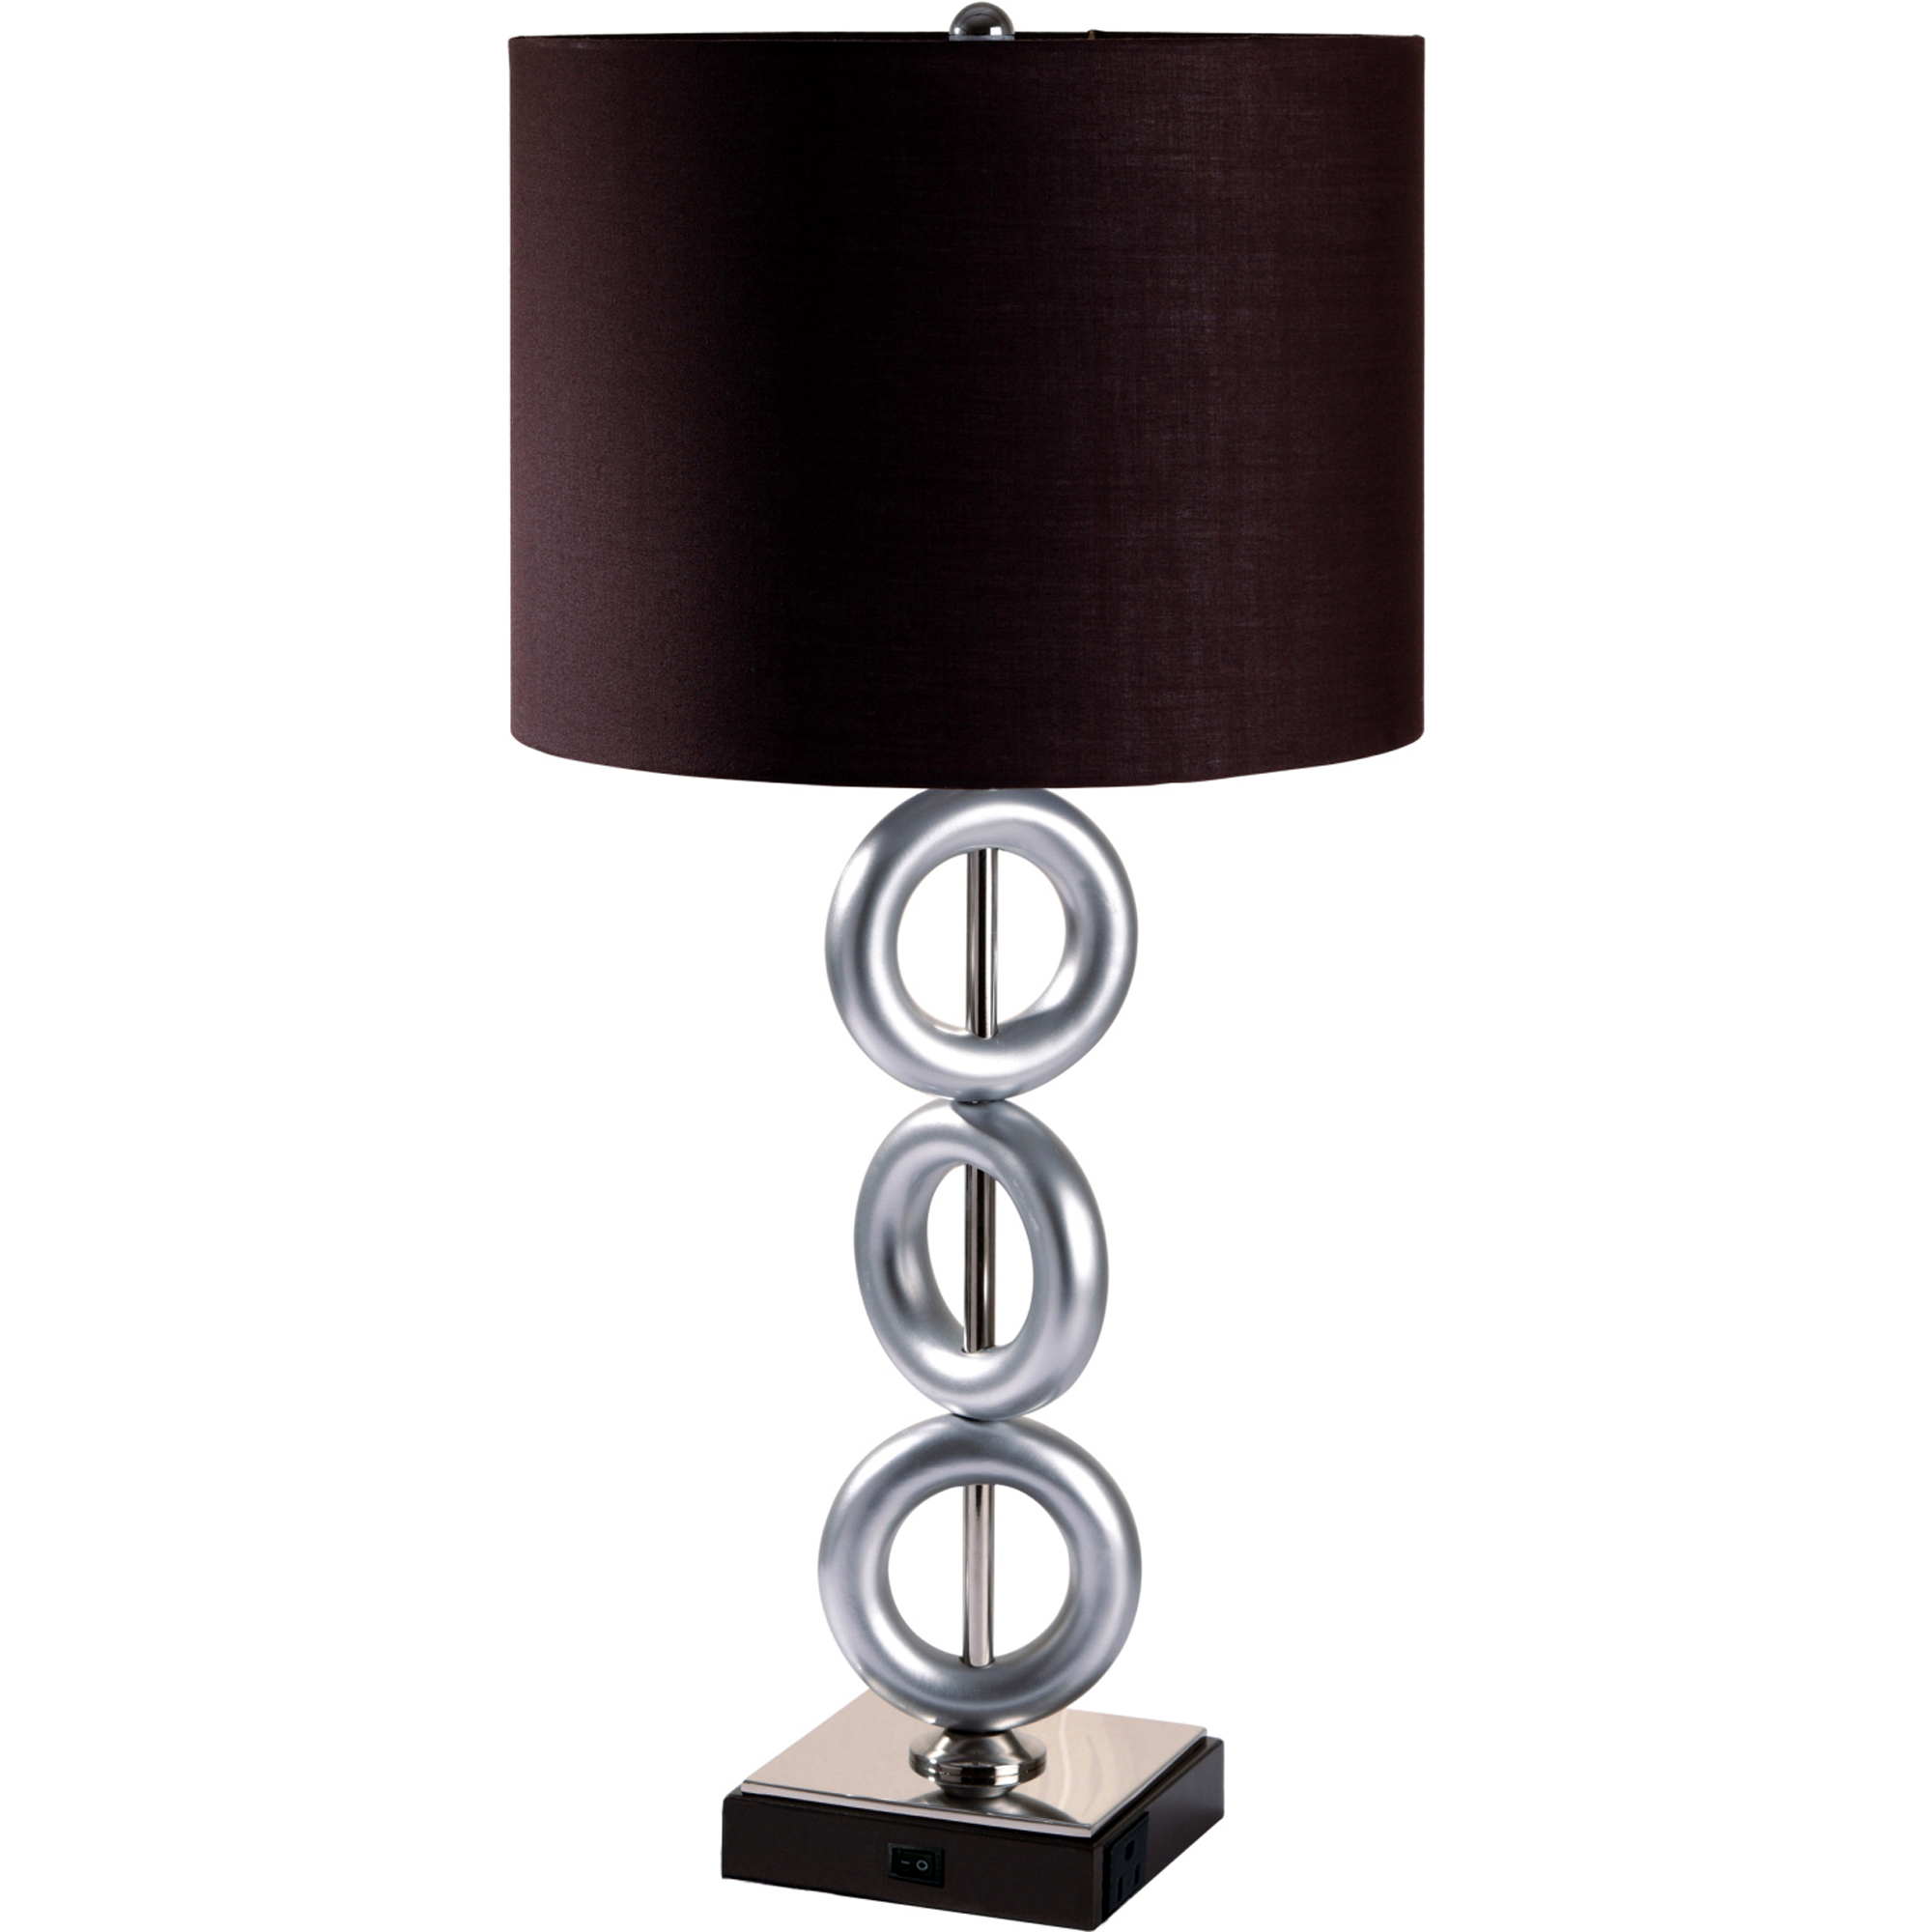 Ore International Brown Three Ring Metal Table Lamp With Convenient Outlet